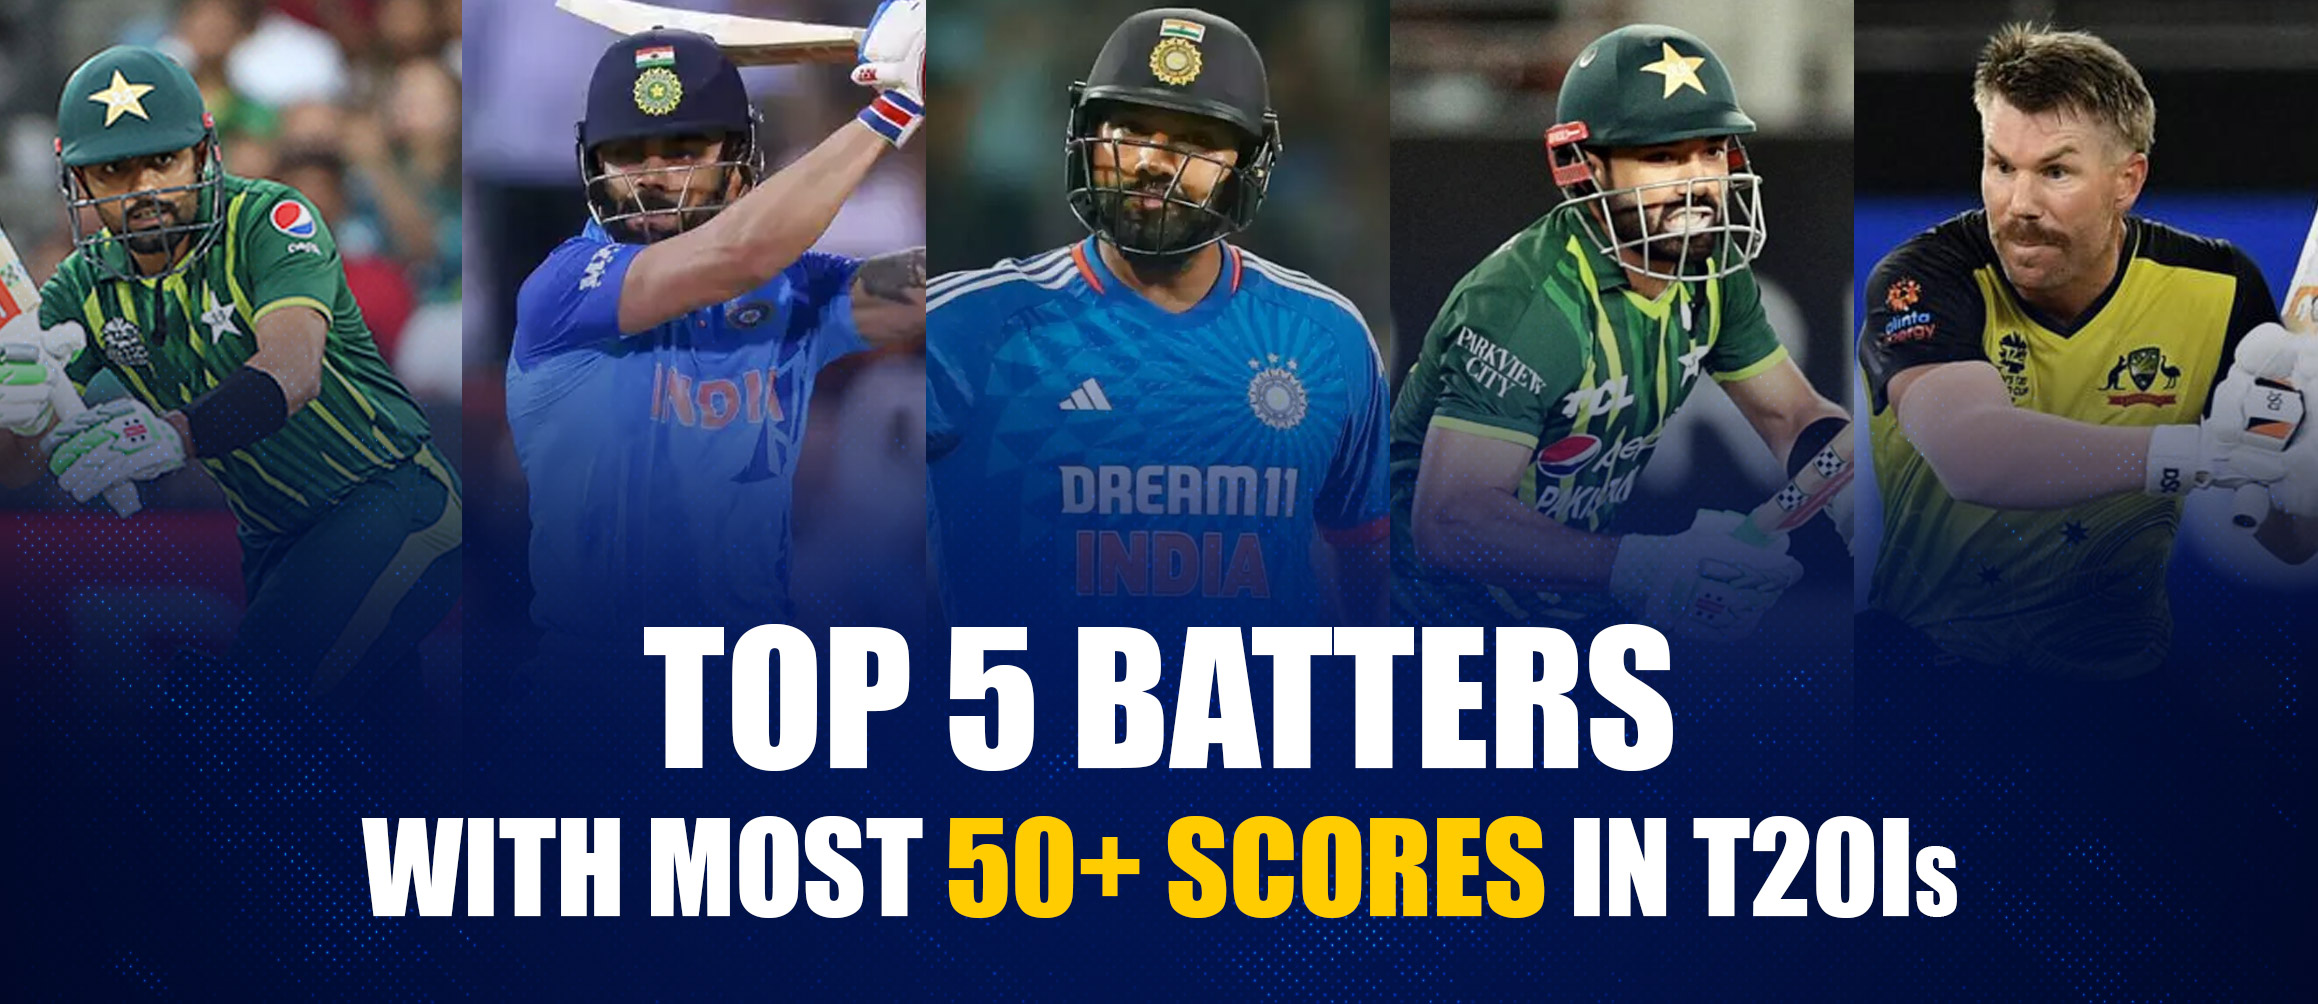 Batters With Most 50+ Scores in T20Is